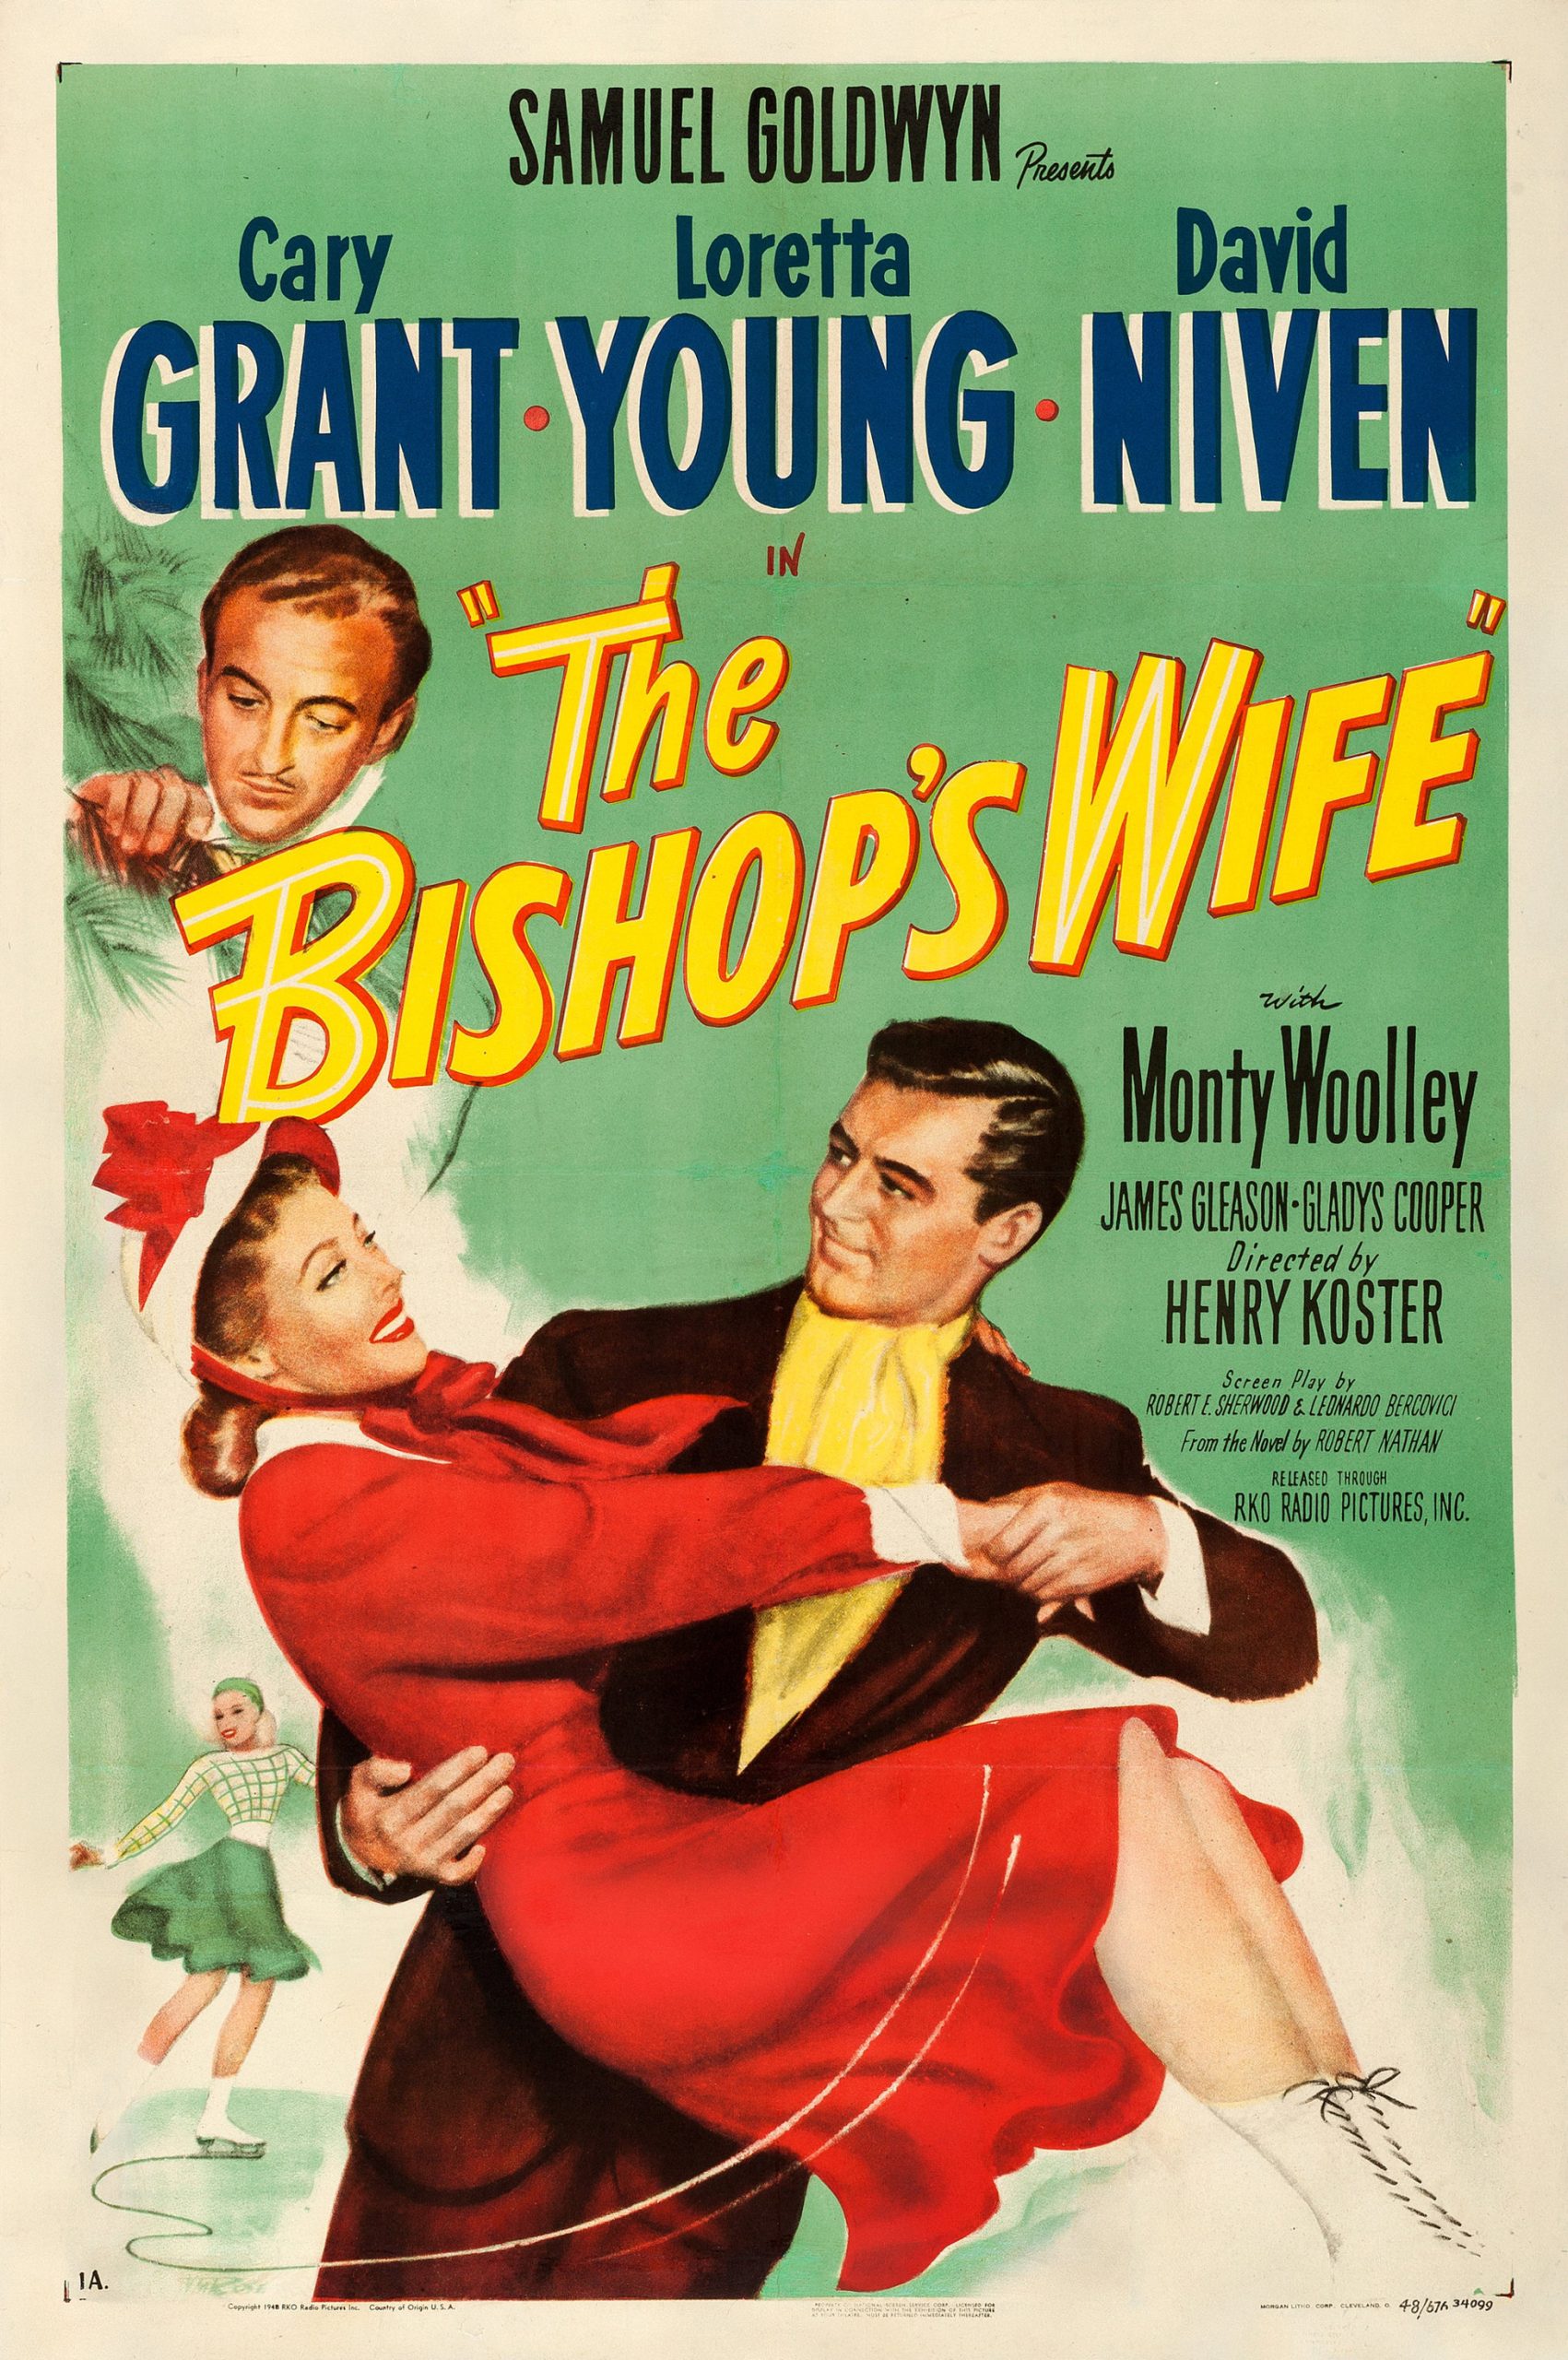 The Bishop’s Wife (1947)